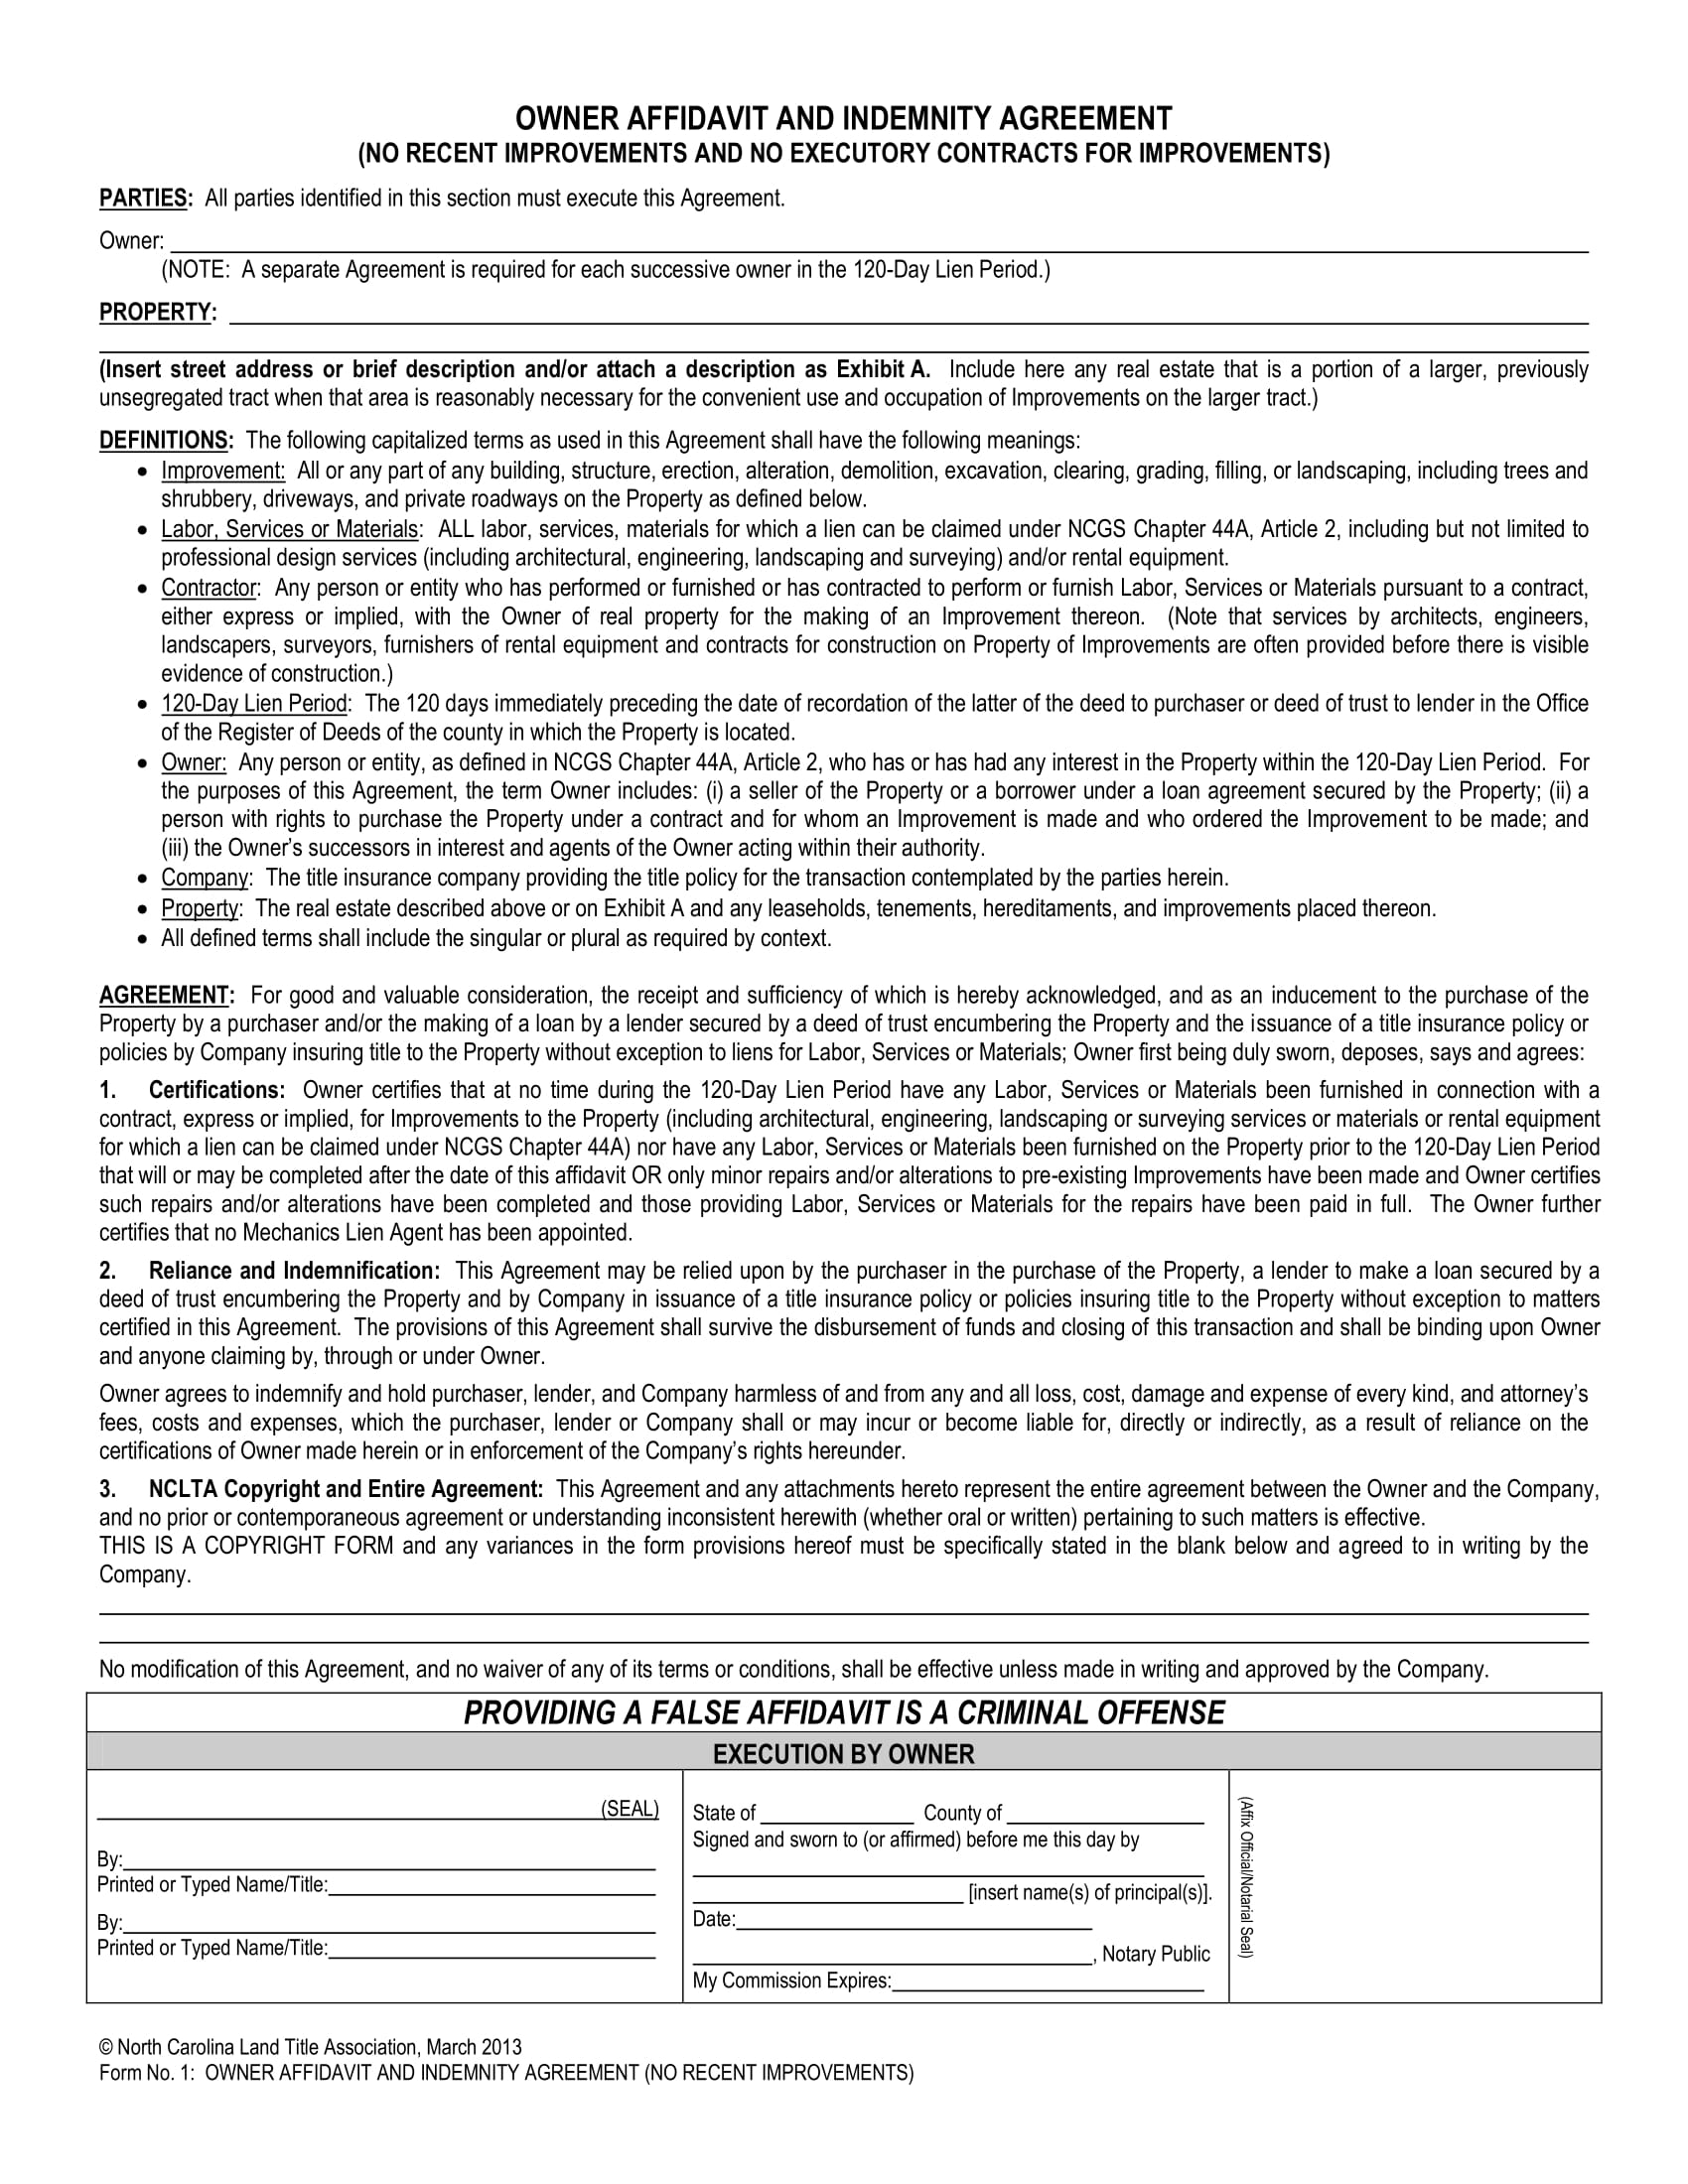 owner affidavit indemnity agreement contract form 1